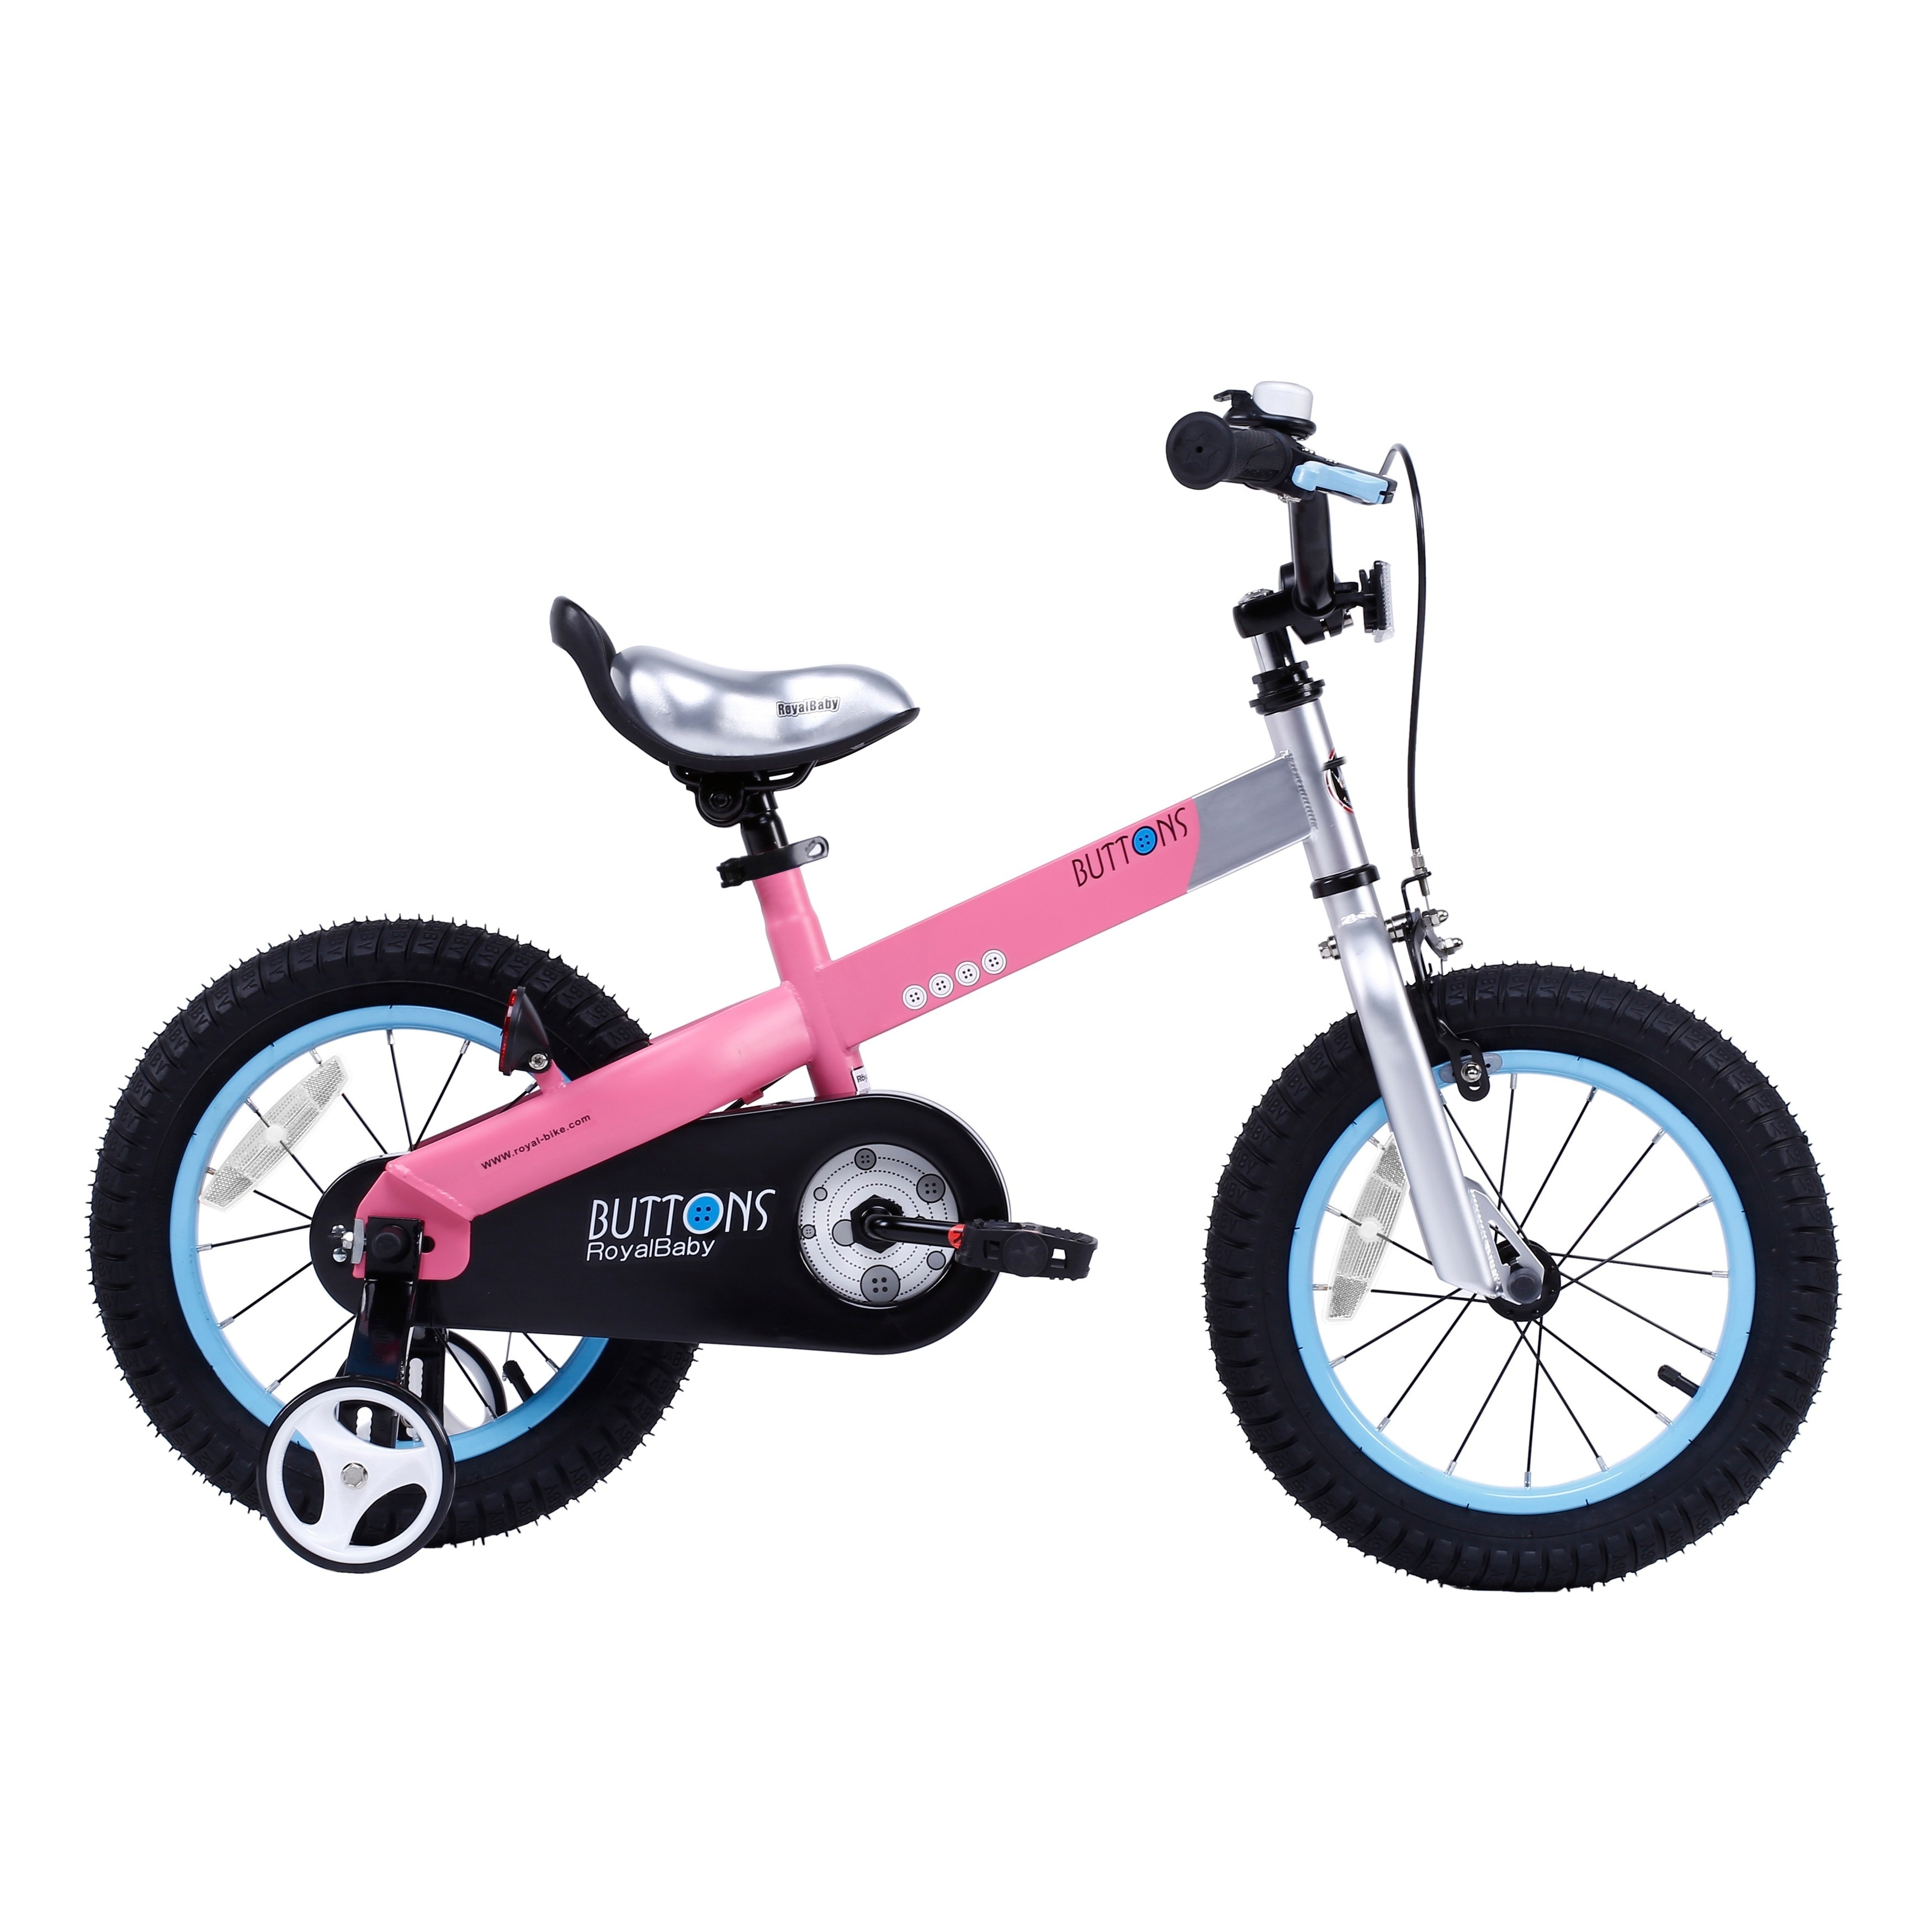 buttons royal baby bike